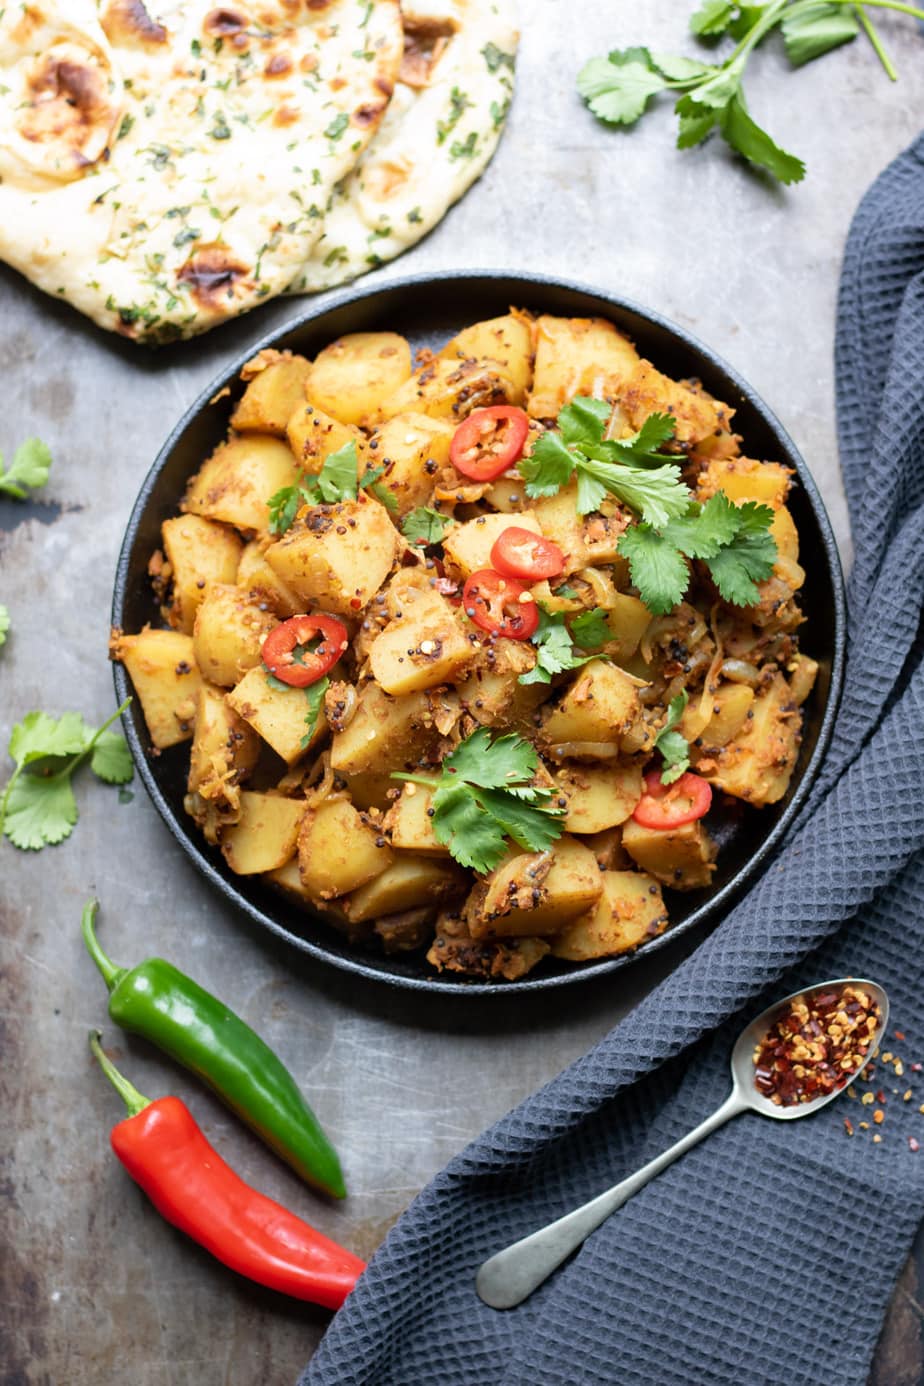 A bowl of Bombay Aloo with chillis, chilli flakes and naan bread.